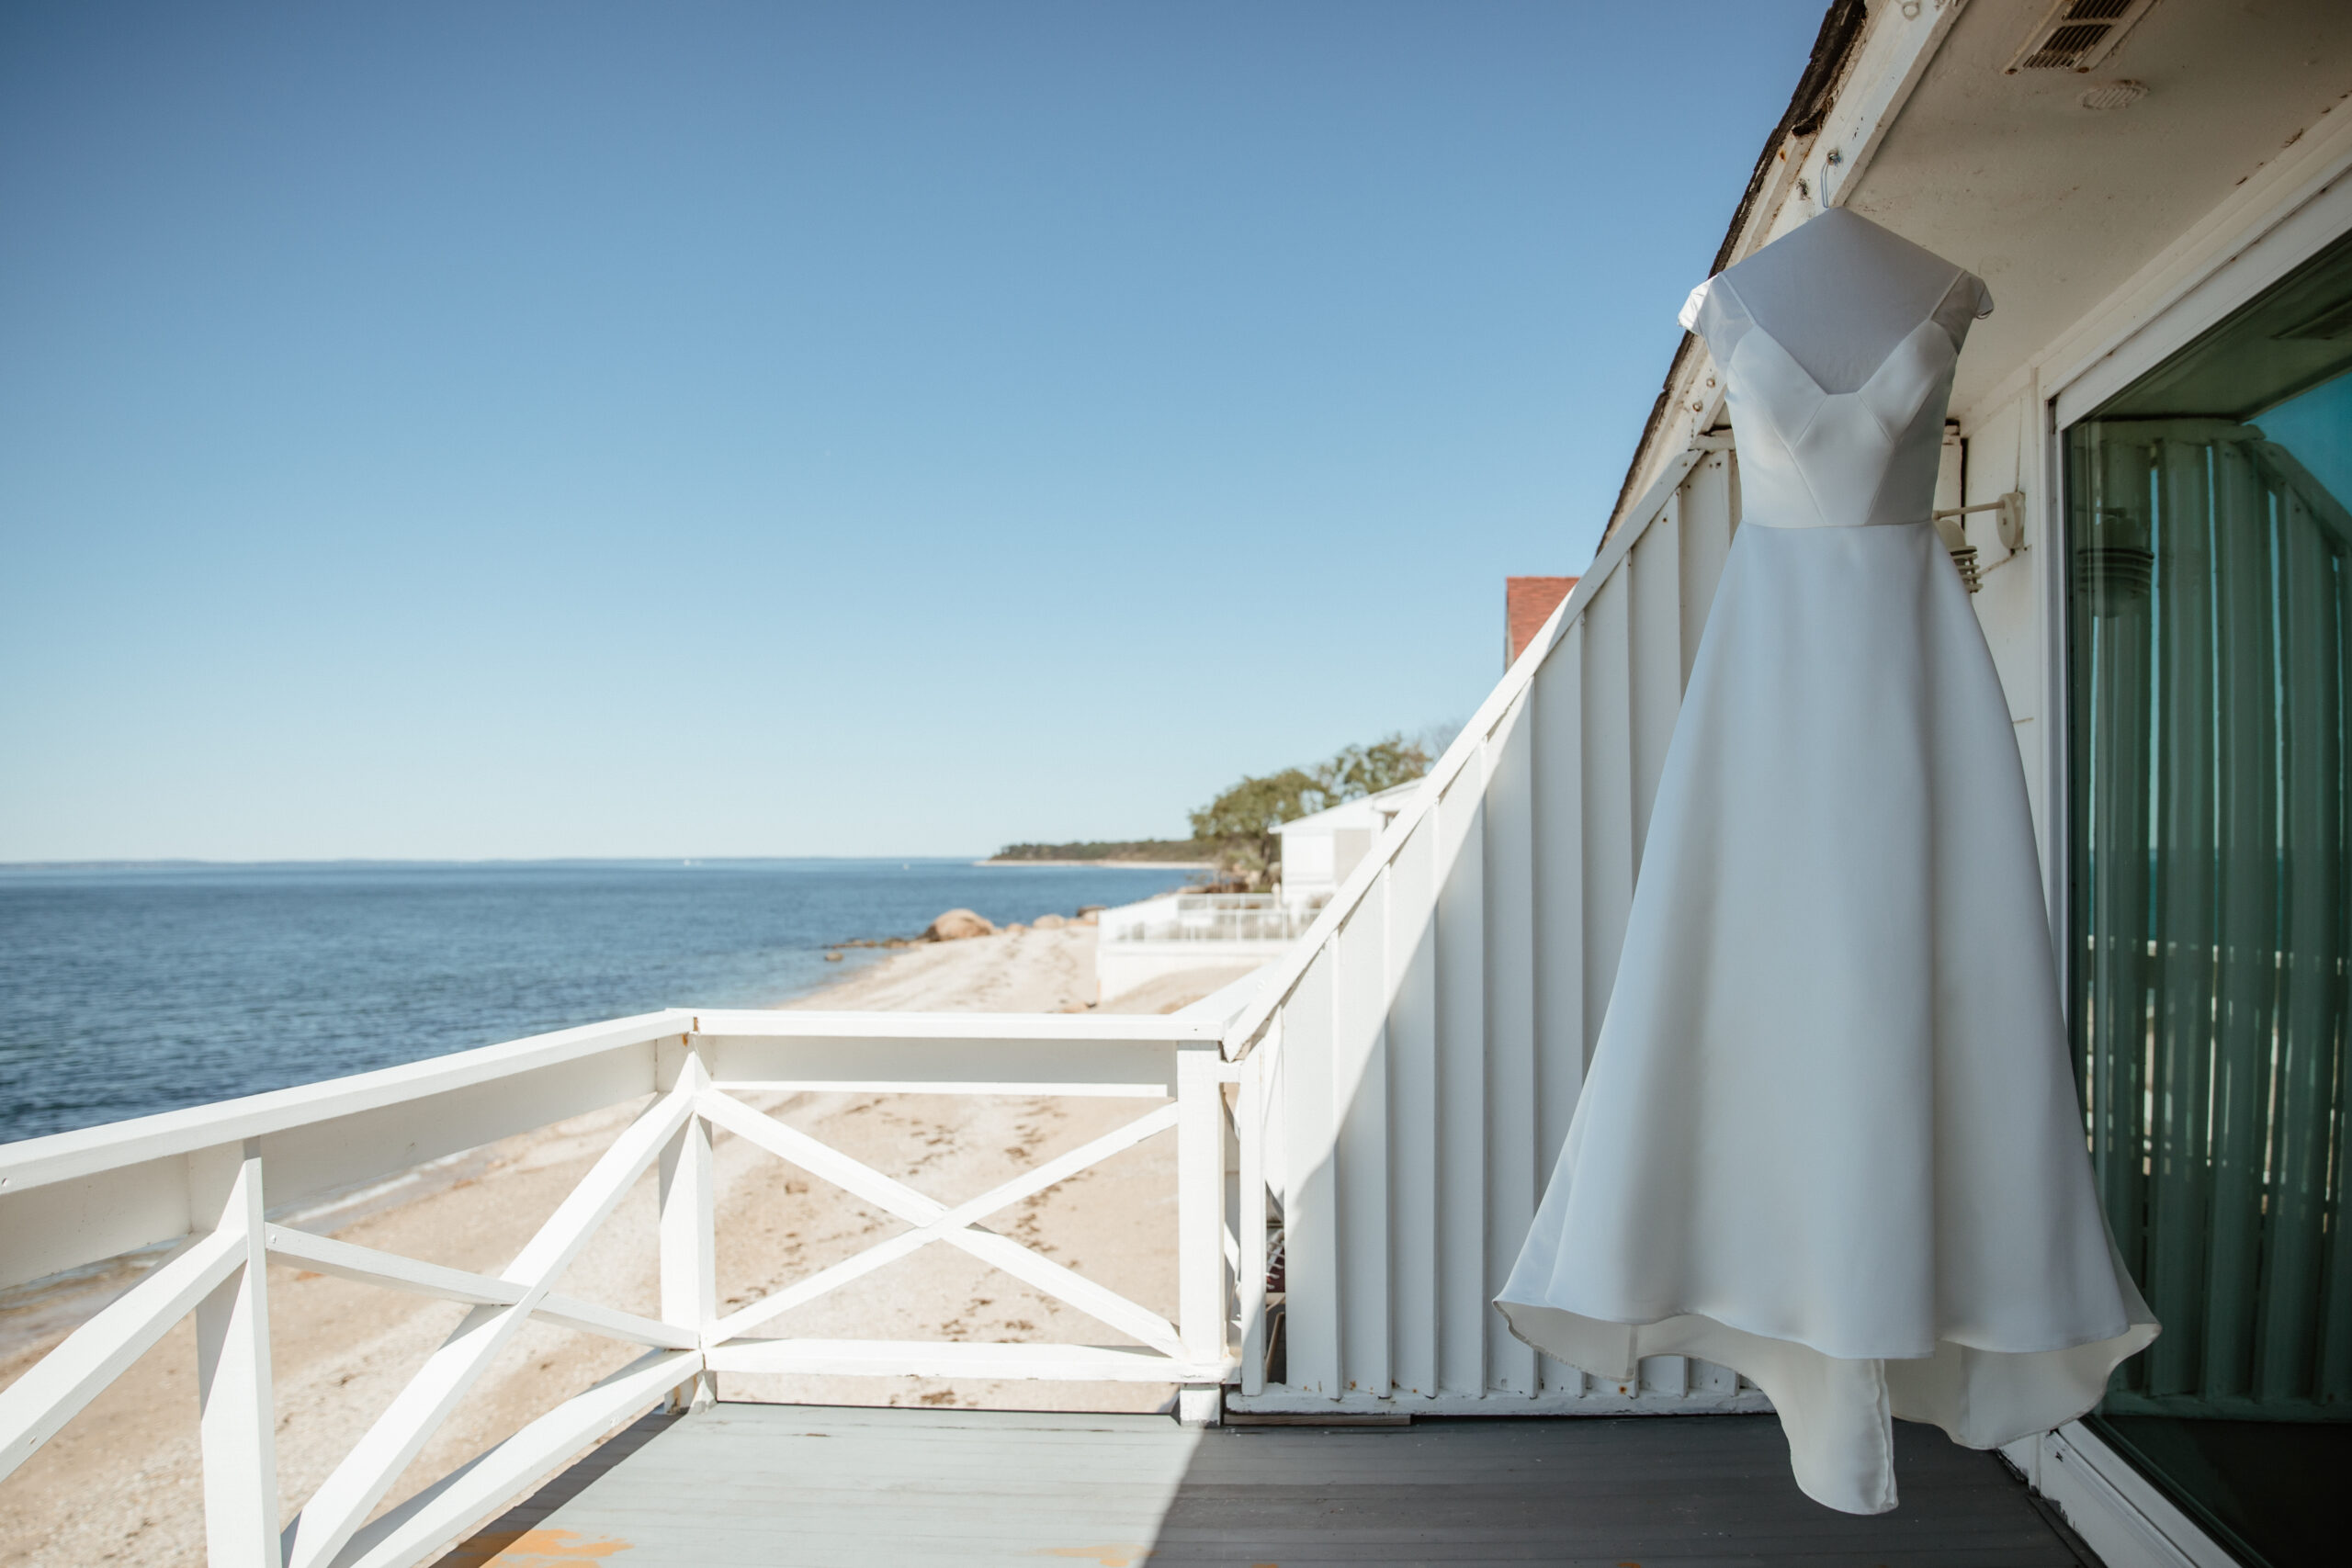 A minimalist bridal dress hangs on display before the wedding day at Bedell Cellars, NY